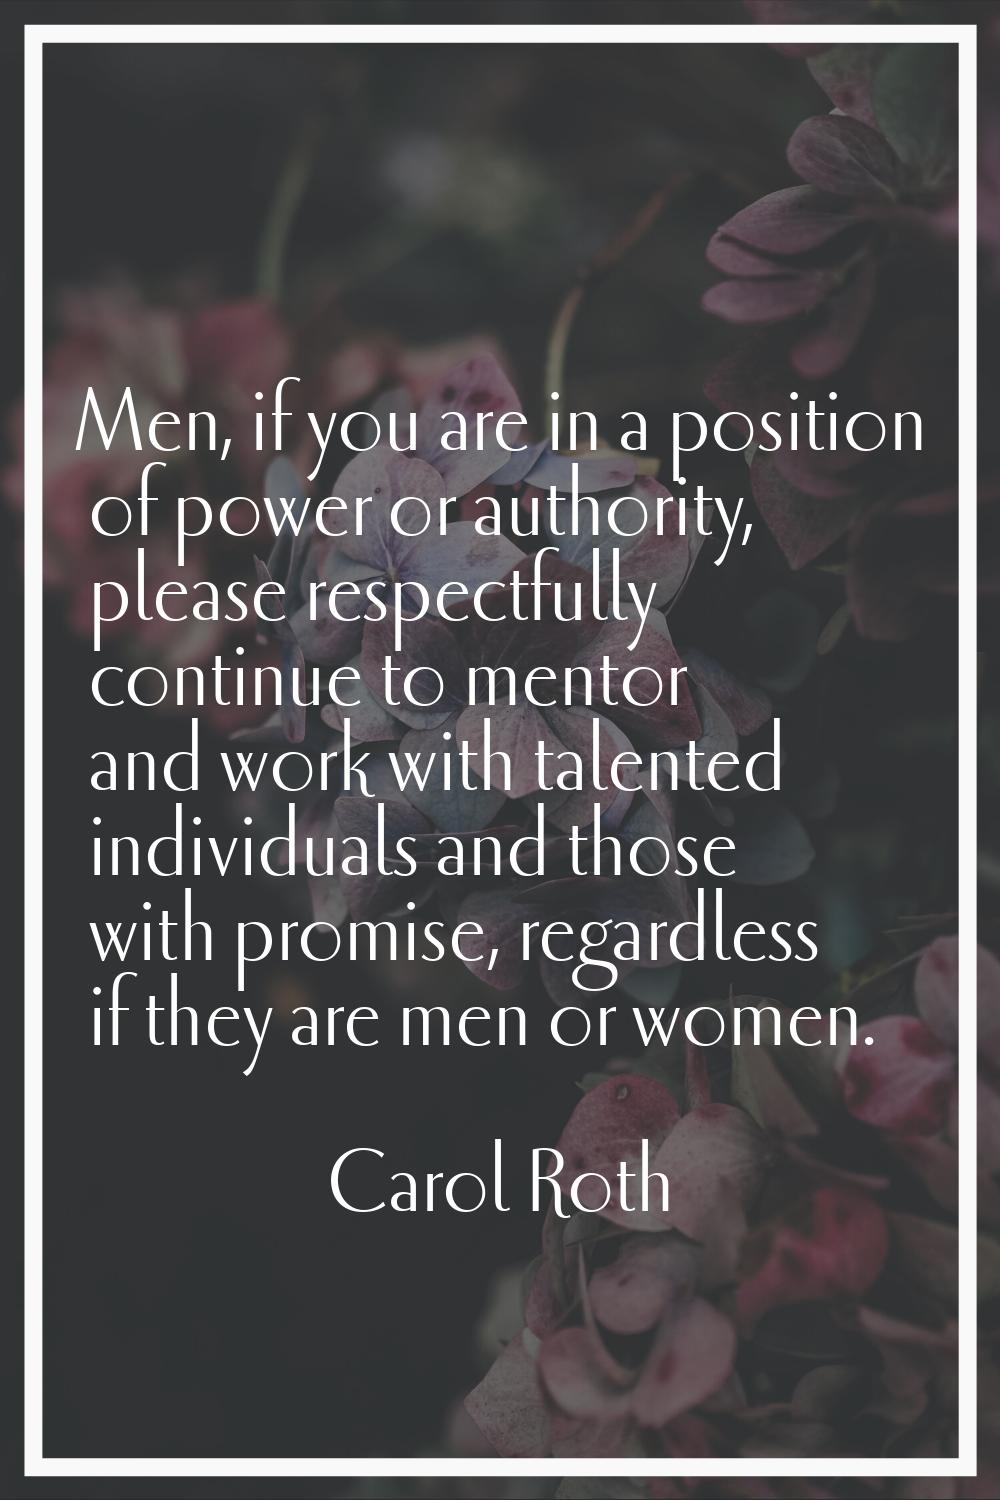 Men, if you are in a position of power or authority, please respectfully continue to mentor and wor